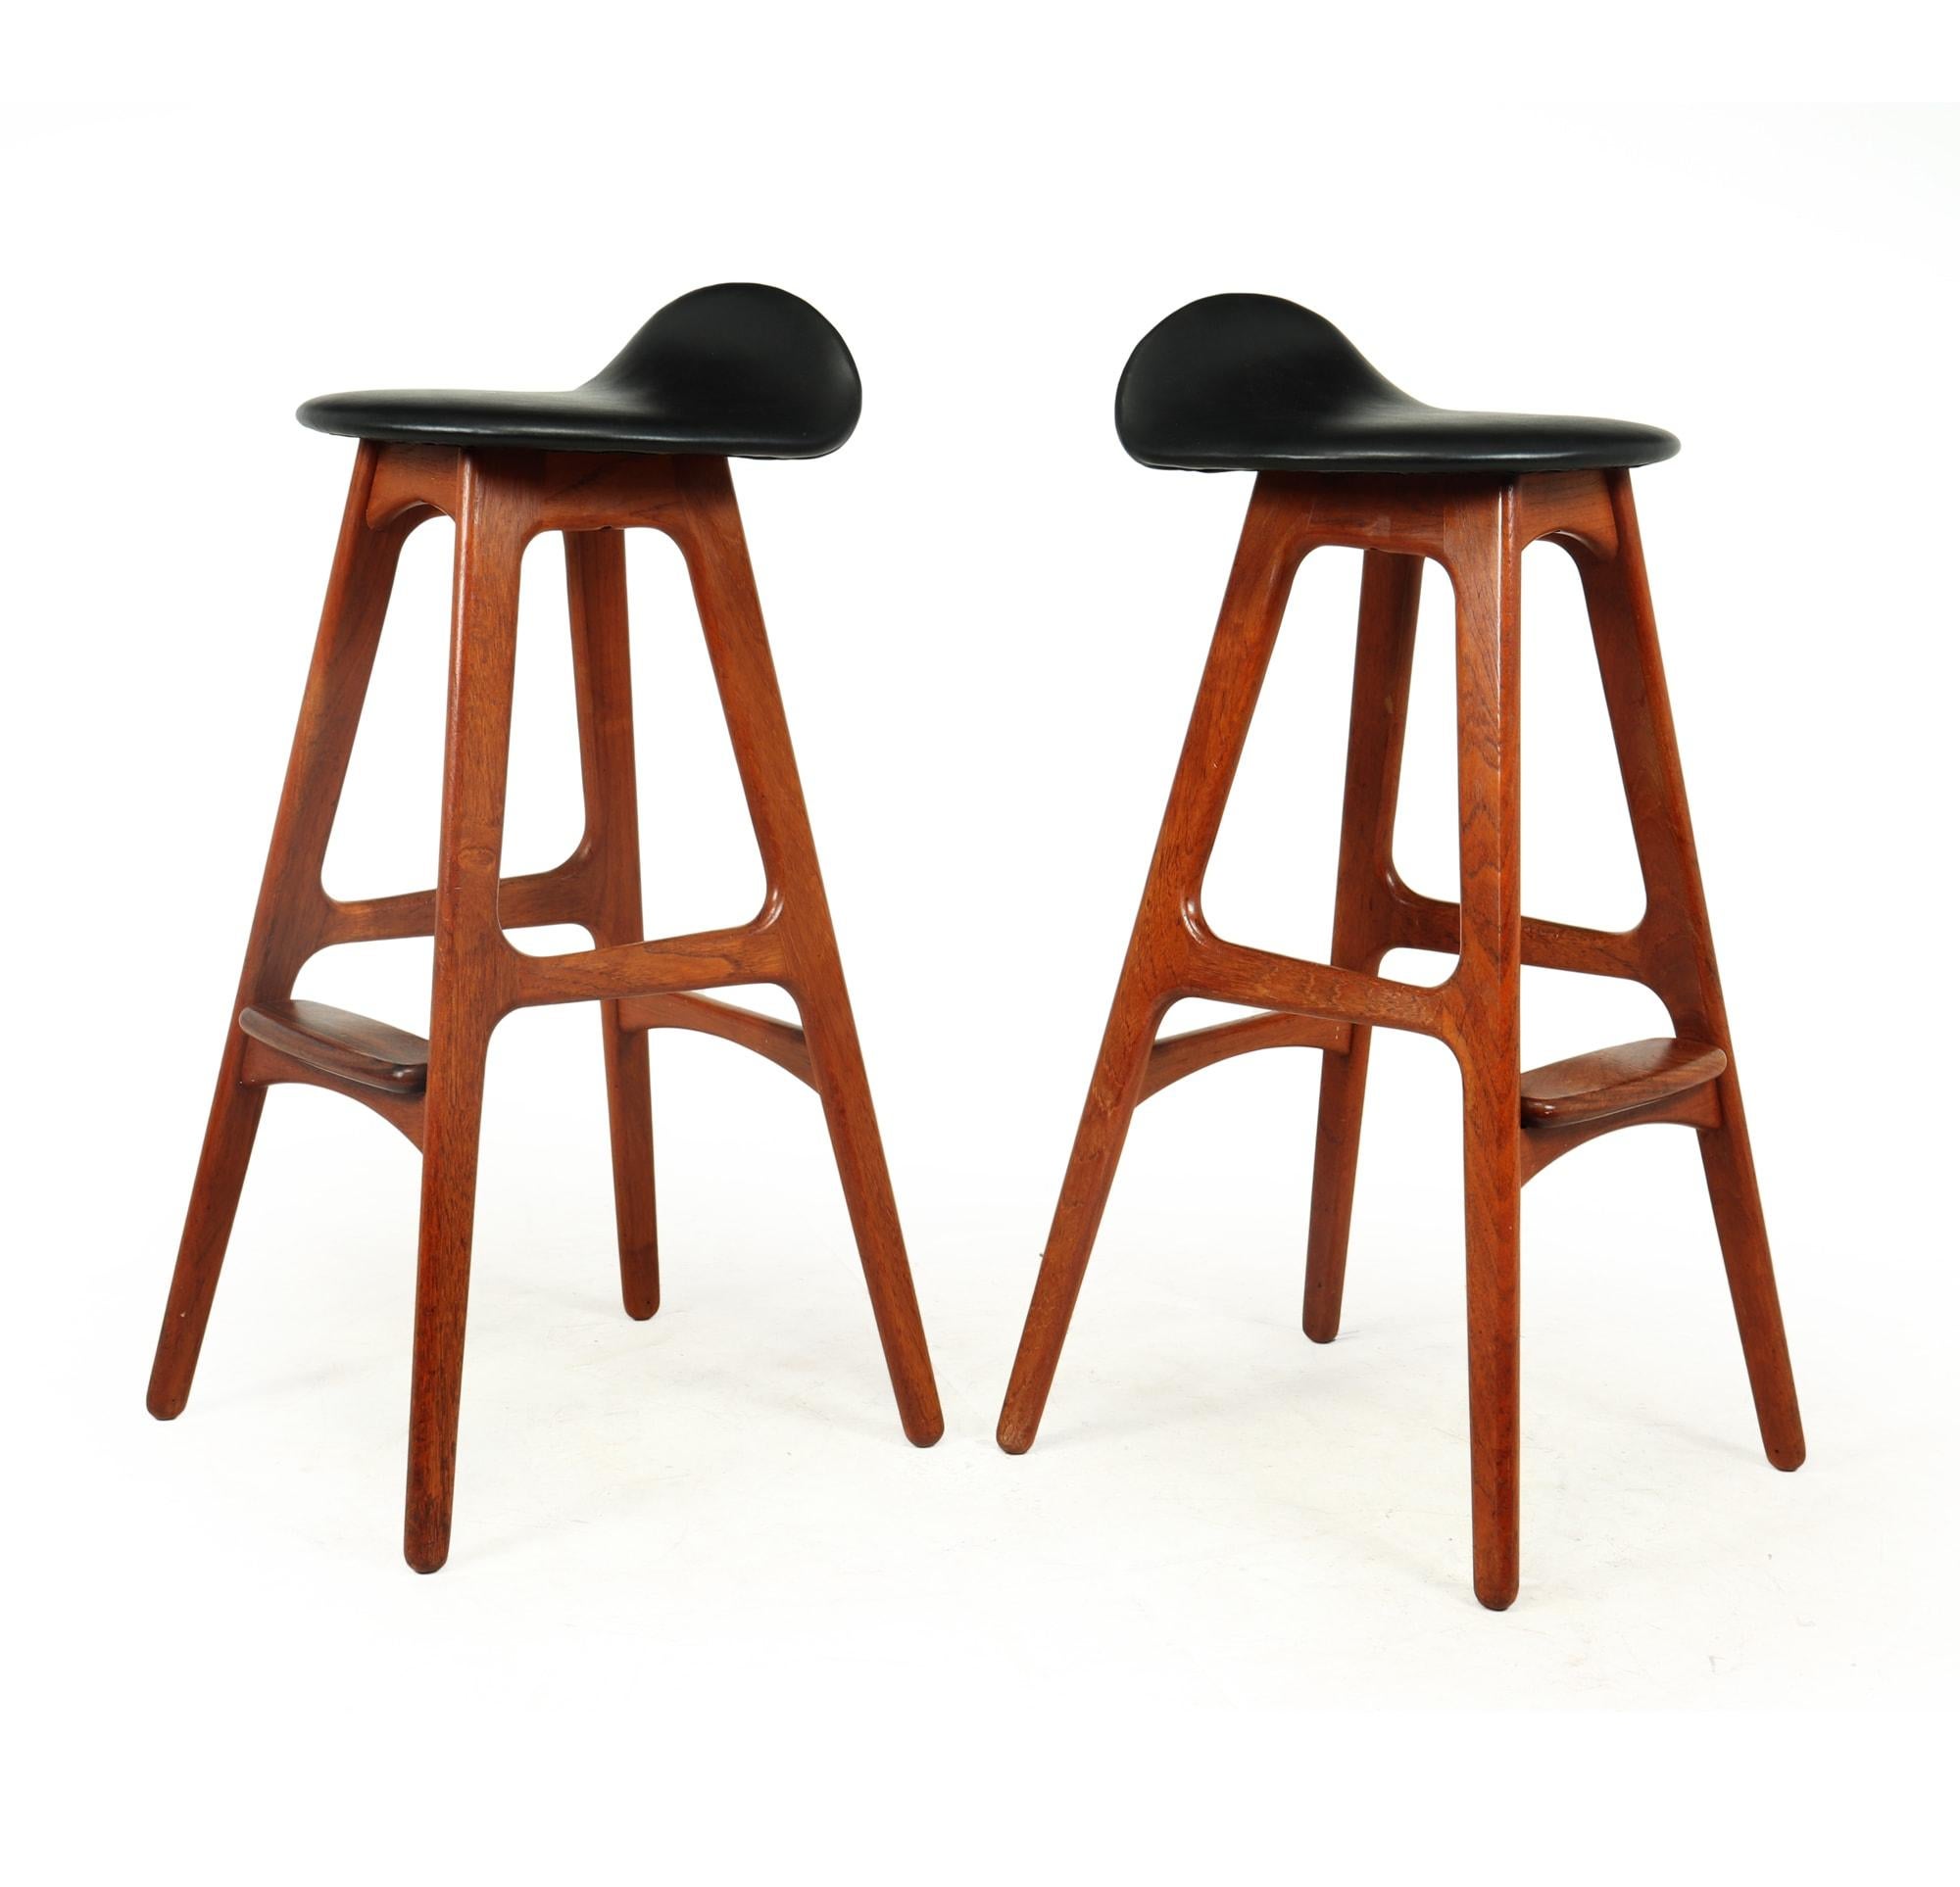 A pair of Iconic stools in teak and leather by Danish designer Erik Buck and produced by Oddense Møbelfabrik in Denmark in the mid 1960’s, they have black leather seats solid teak frame with rosewood footrests, the seats have been re upholstered in